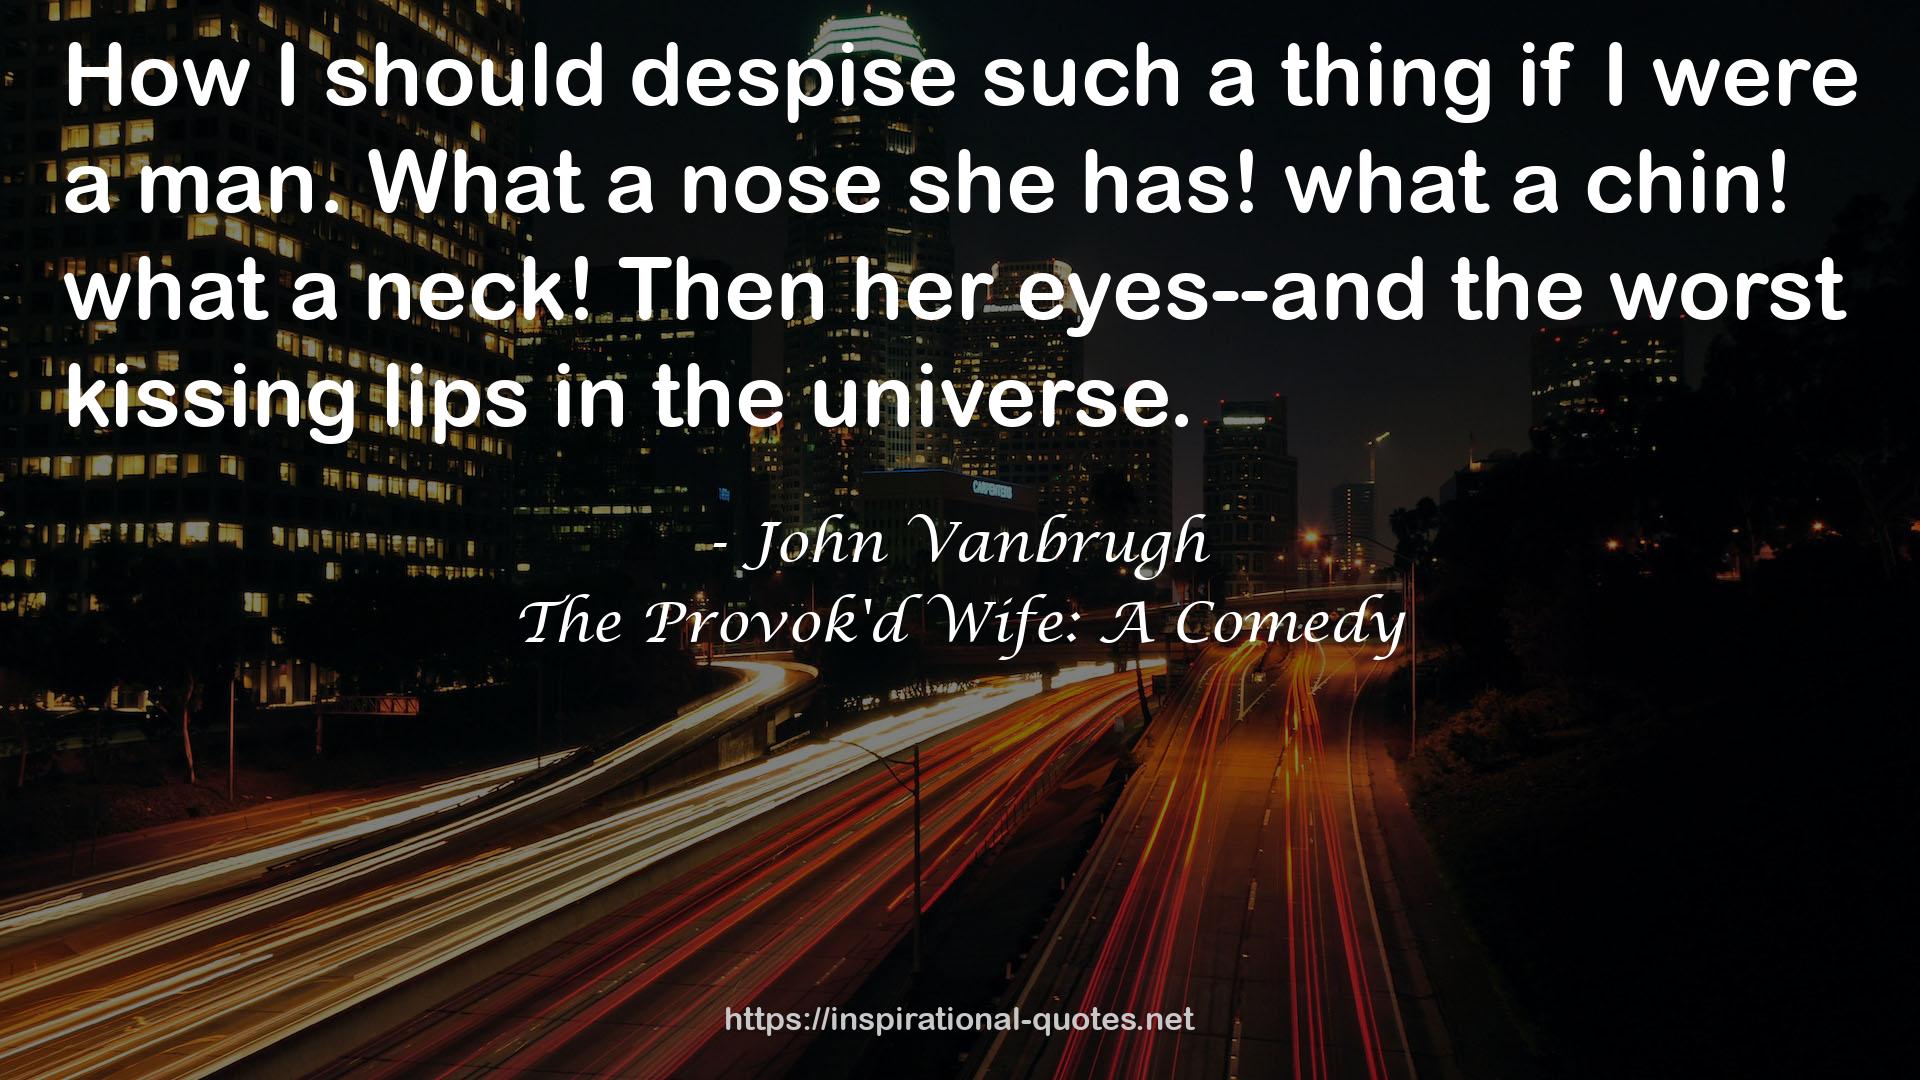 The Provok'd Wife: A Comedy QUOTES